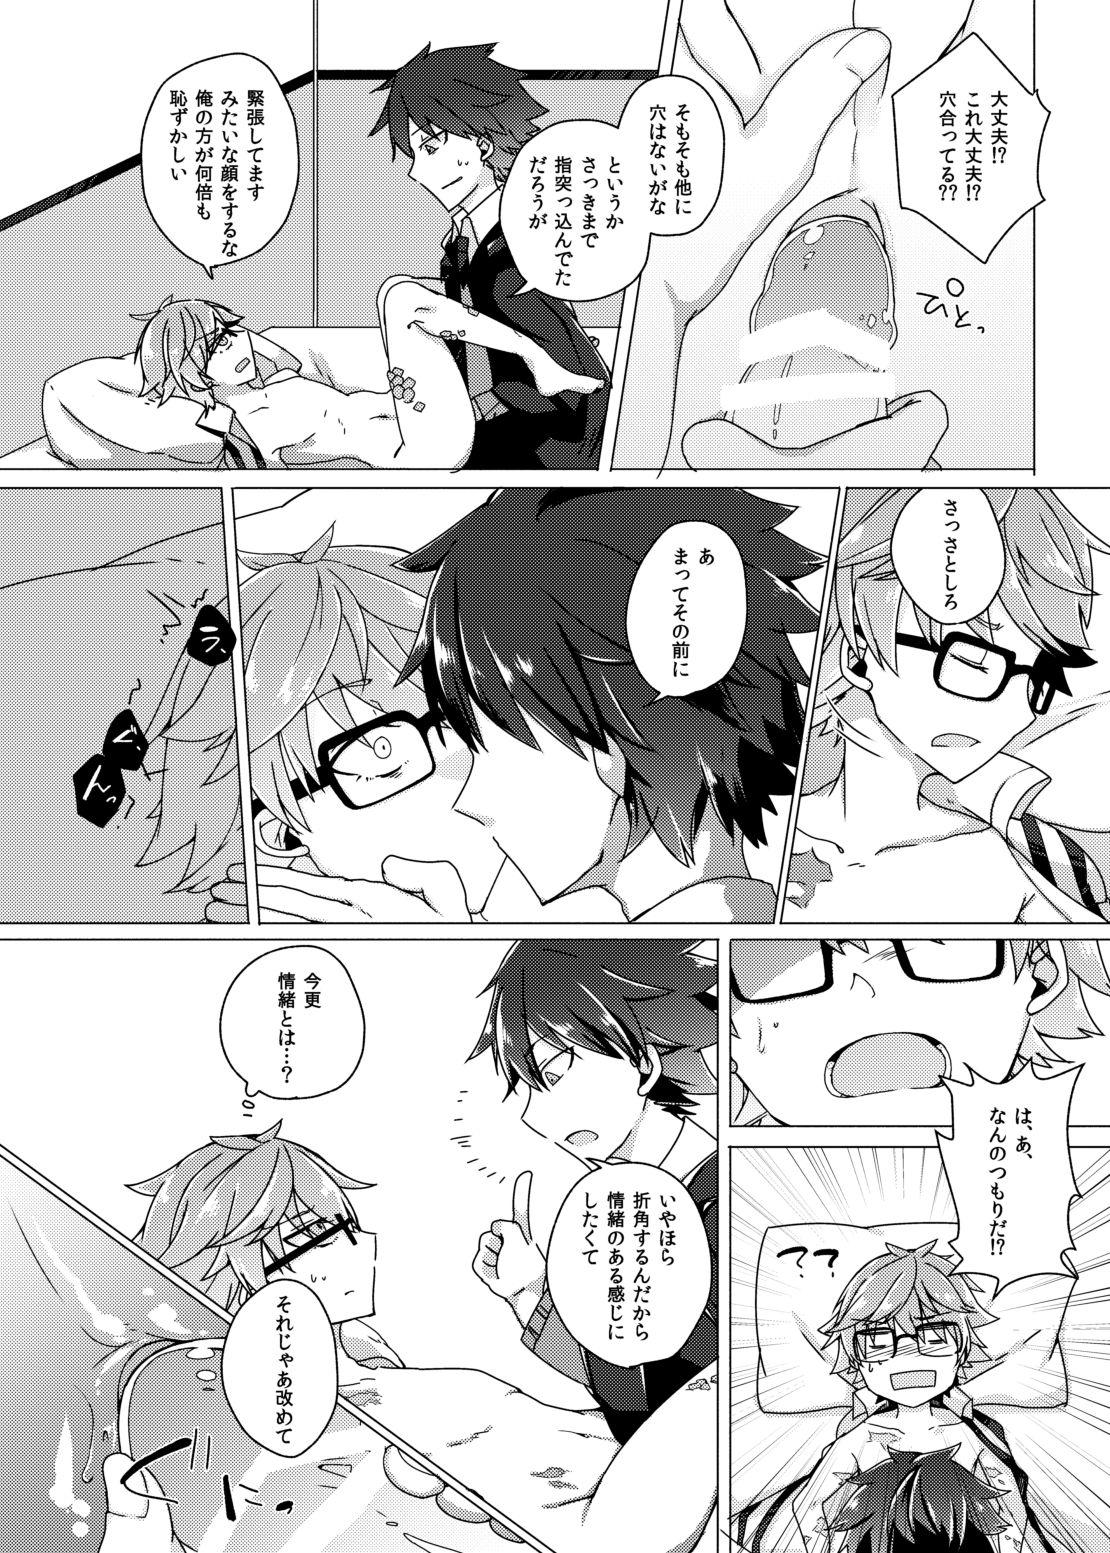 Stepbrother ぐだデル寄稿まんが再録 - Fate grand order Liveshow - Page 8